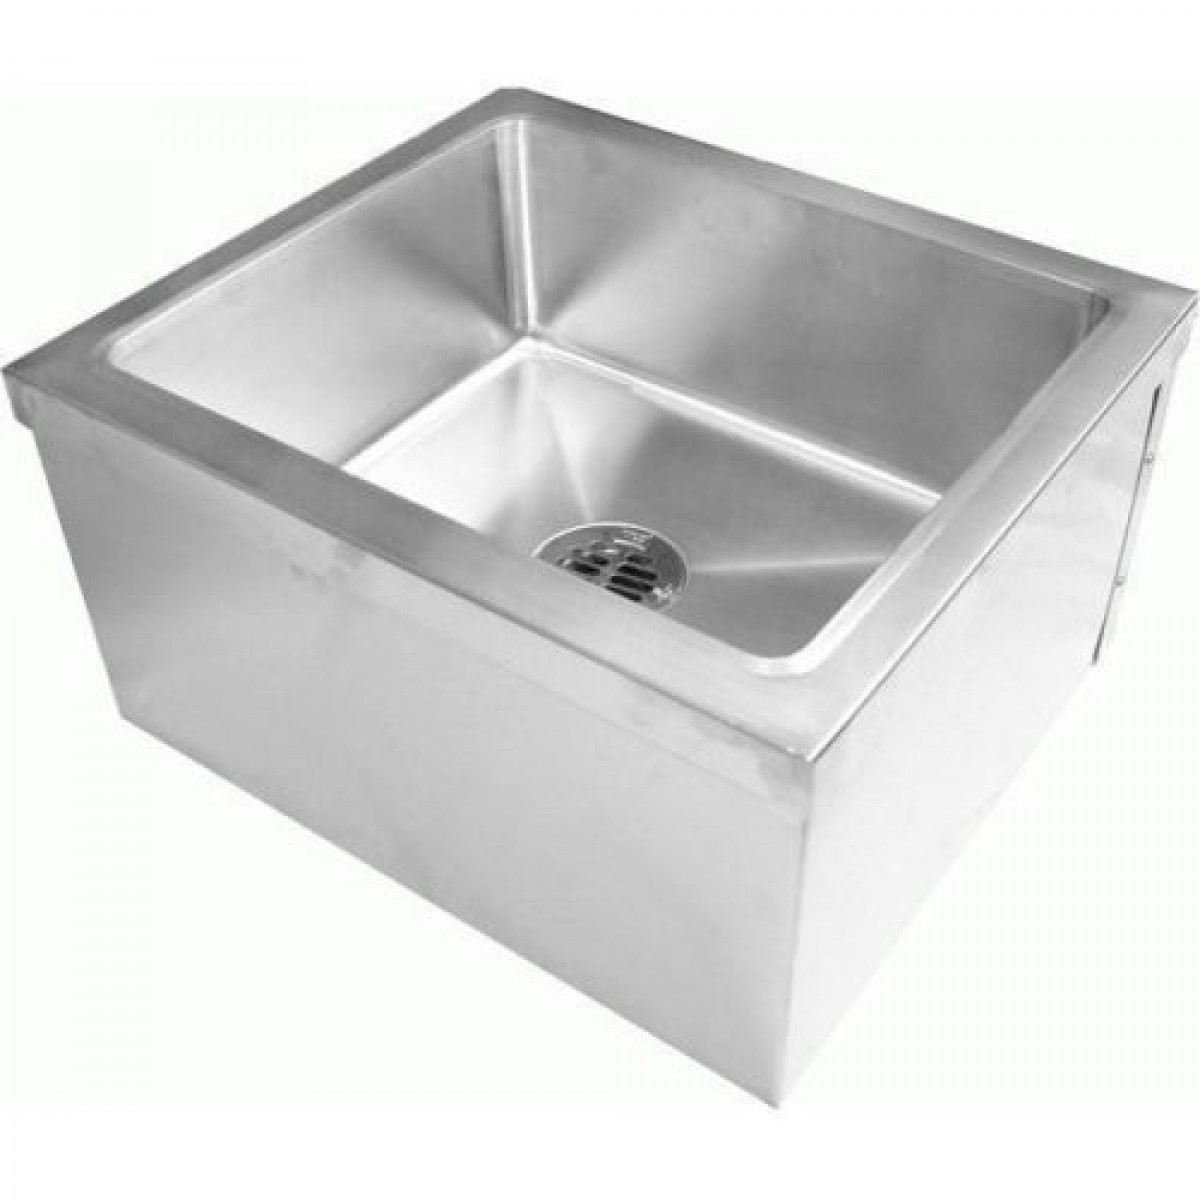 Commercial Stainless Steel Floor Mount Mop Sink 20 Wx24 Lx11 1 2 H